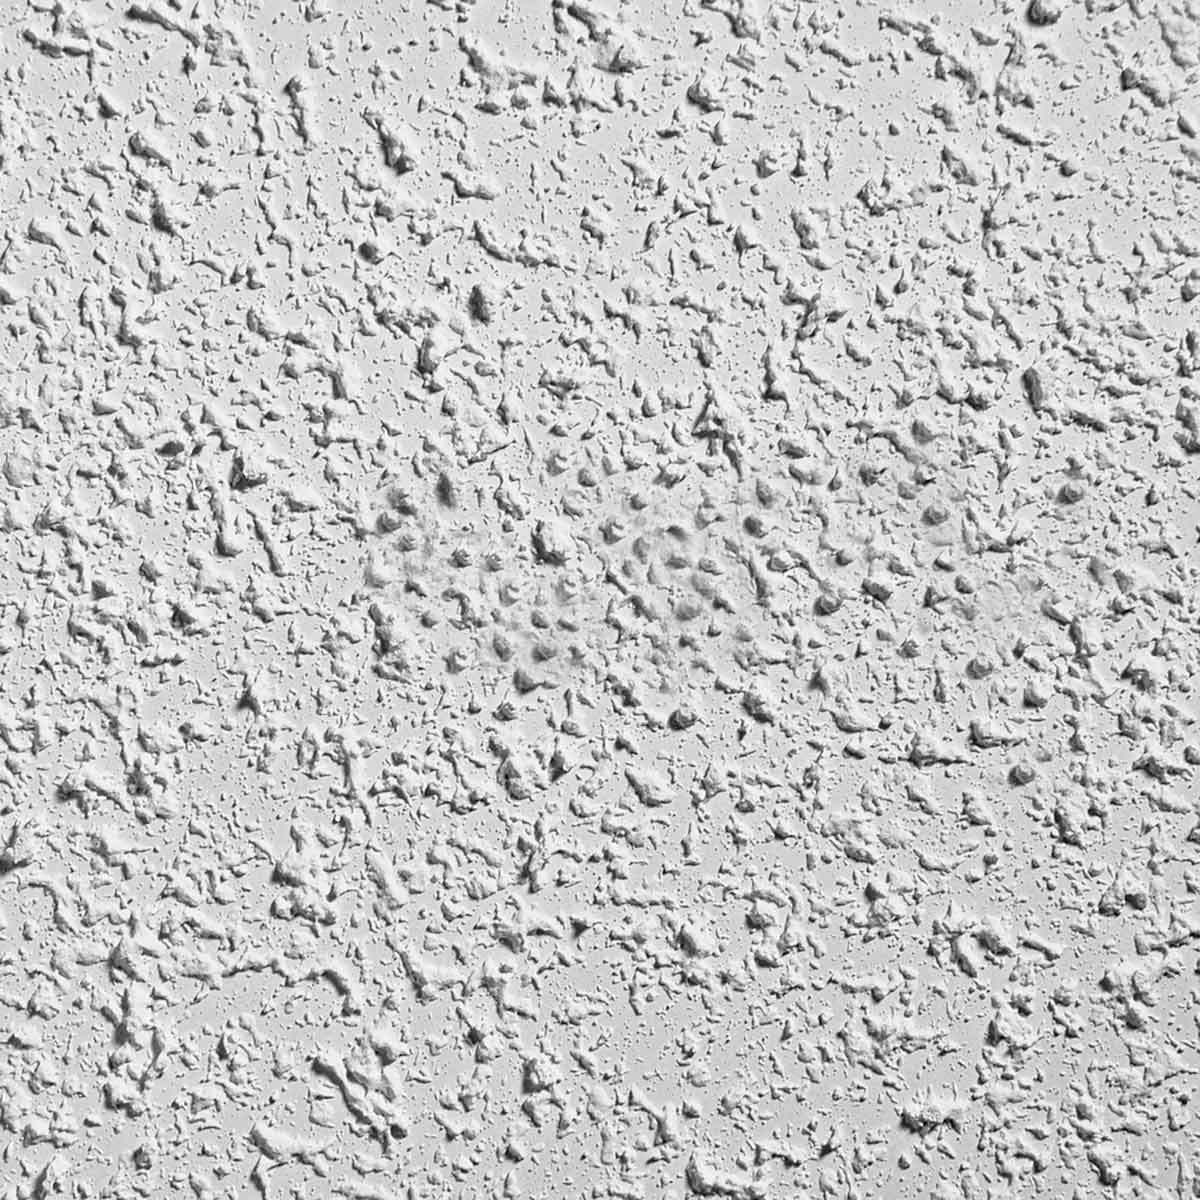 Drywall Texture Types You Need to Know